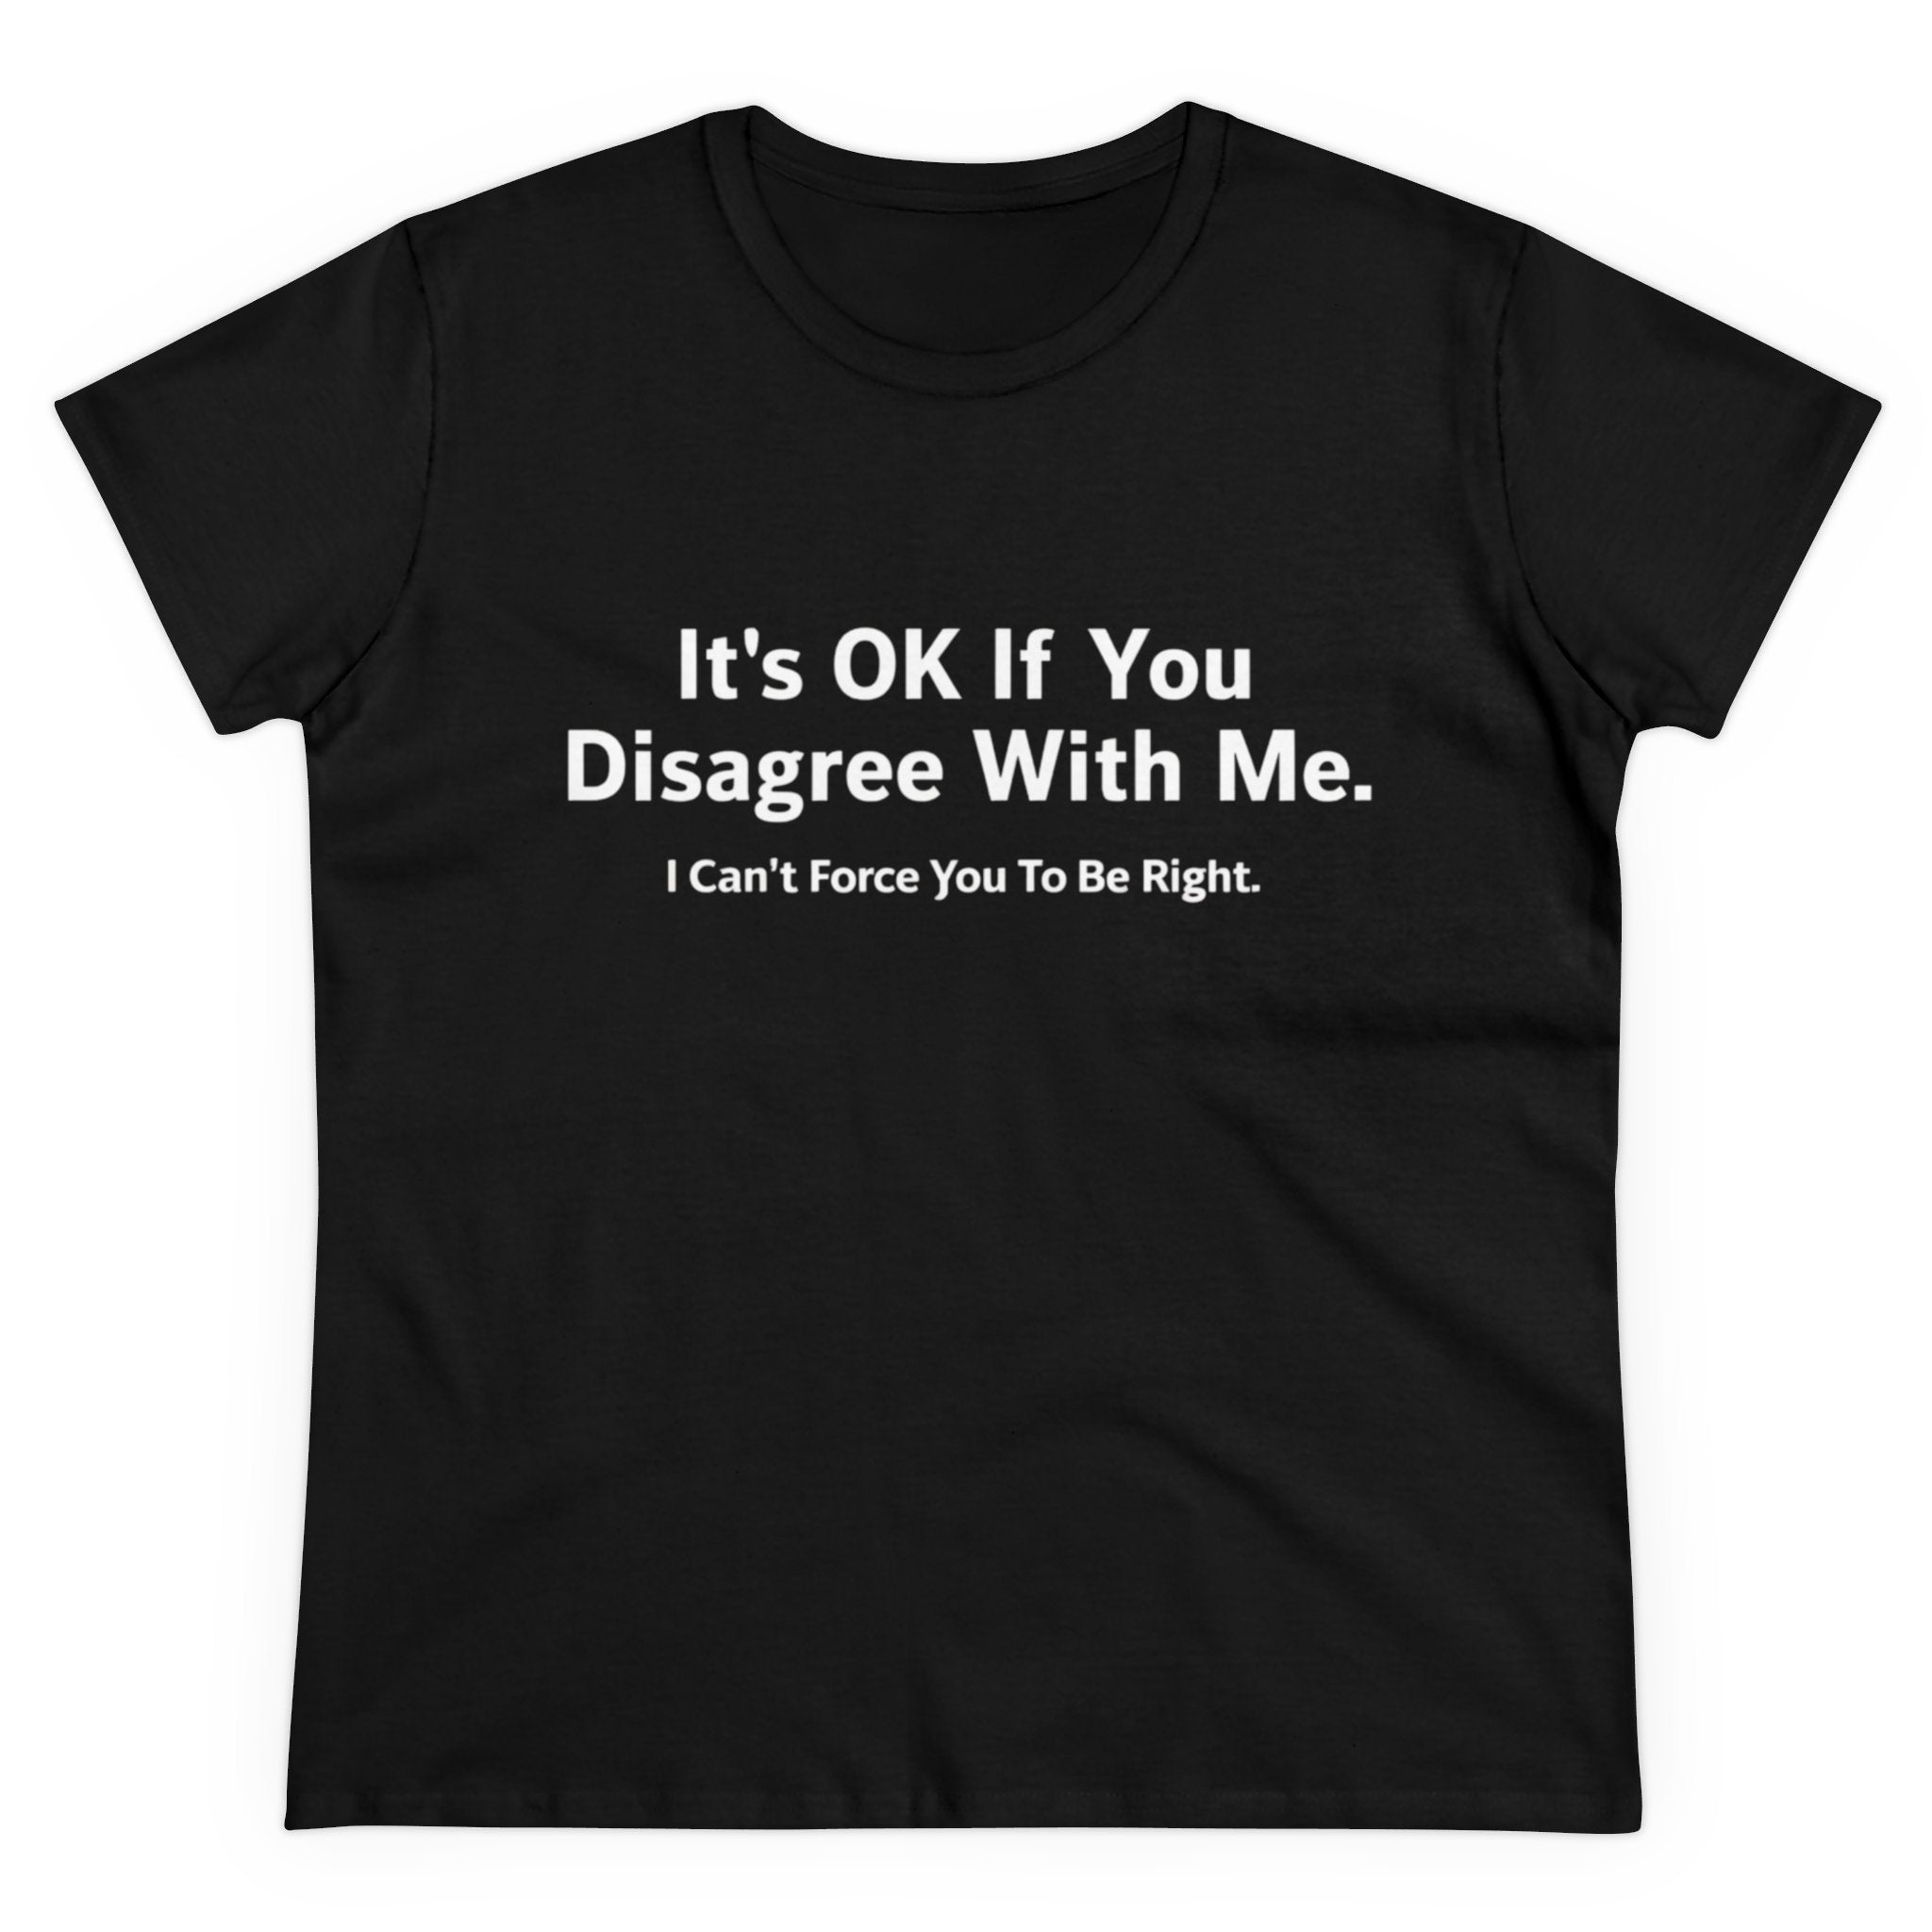 It's Ok If You Disagree With Me - Women's Tee with the text "It's OK If You Disagree With Me. I Can't Force You To Be Right." printed in white uppercase letters, offering both comfort & style with an empowering print.